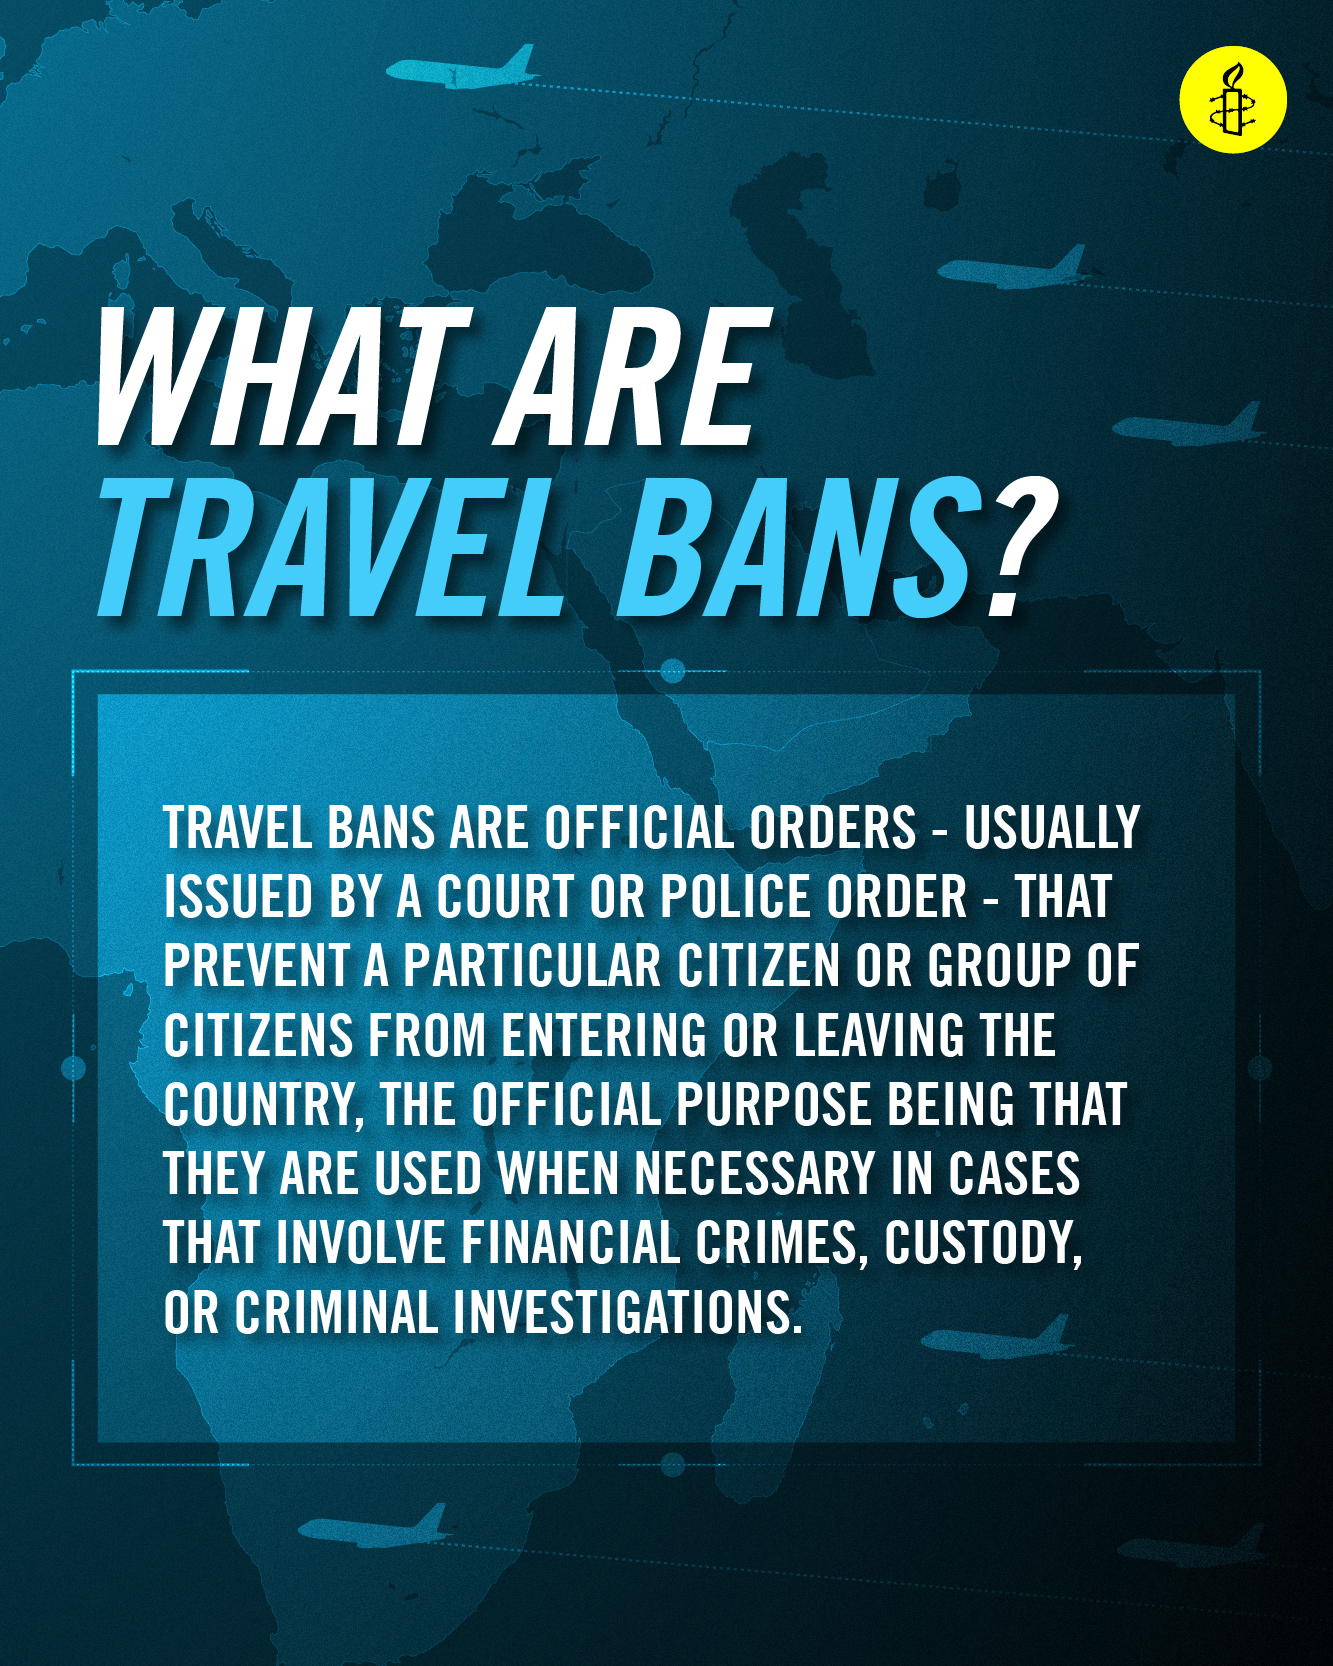 "A graphic explaining that travel bans are orders that prevent citizens for entering or leaving the country."